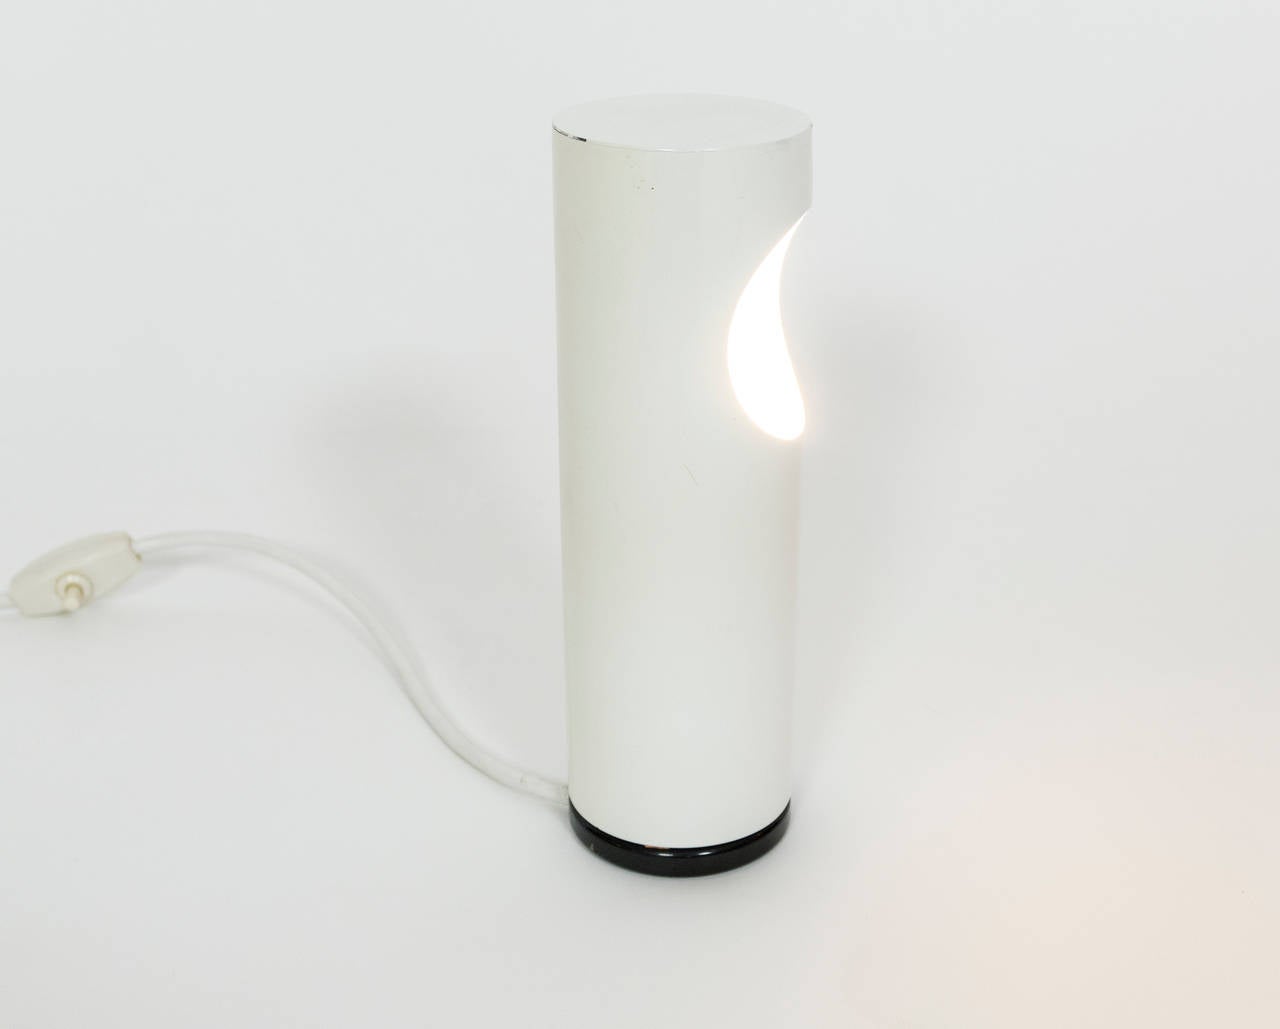 Ecolight Milano tube lamp. This original table lamp by Gaetano Scolari provides ambience light. Lamp is in our NYC showroom in the New York Design Center.